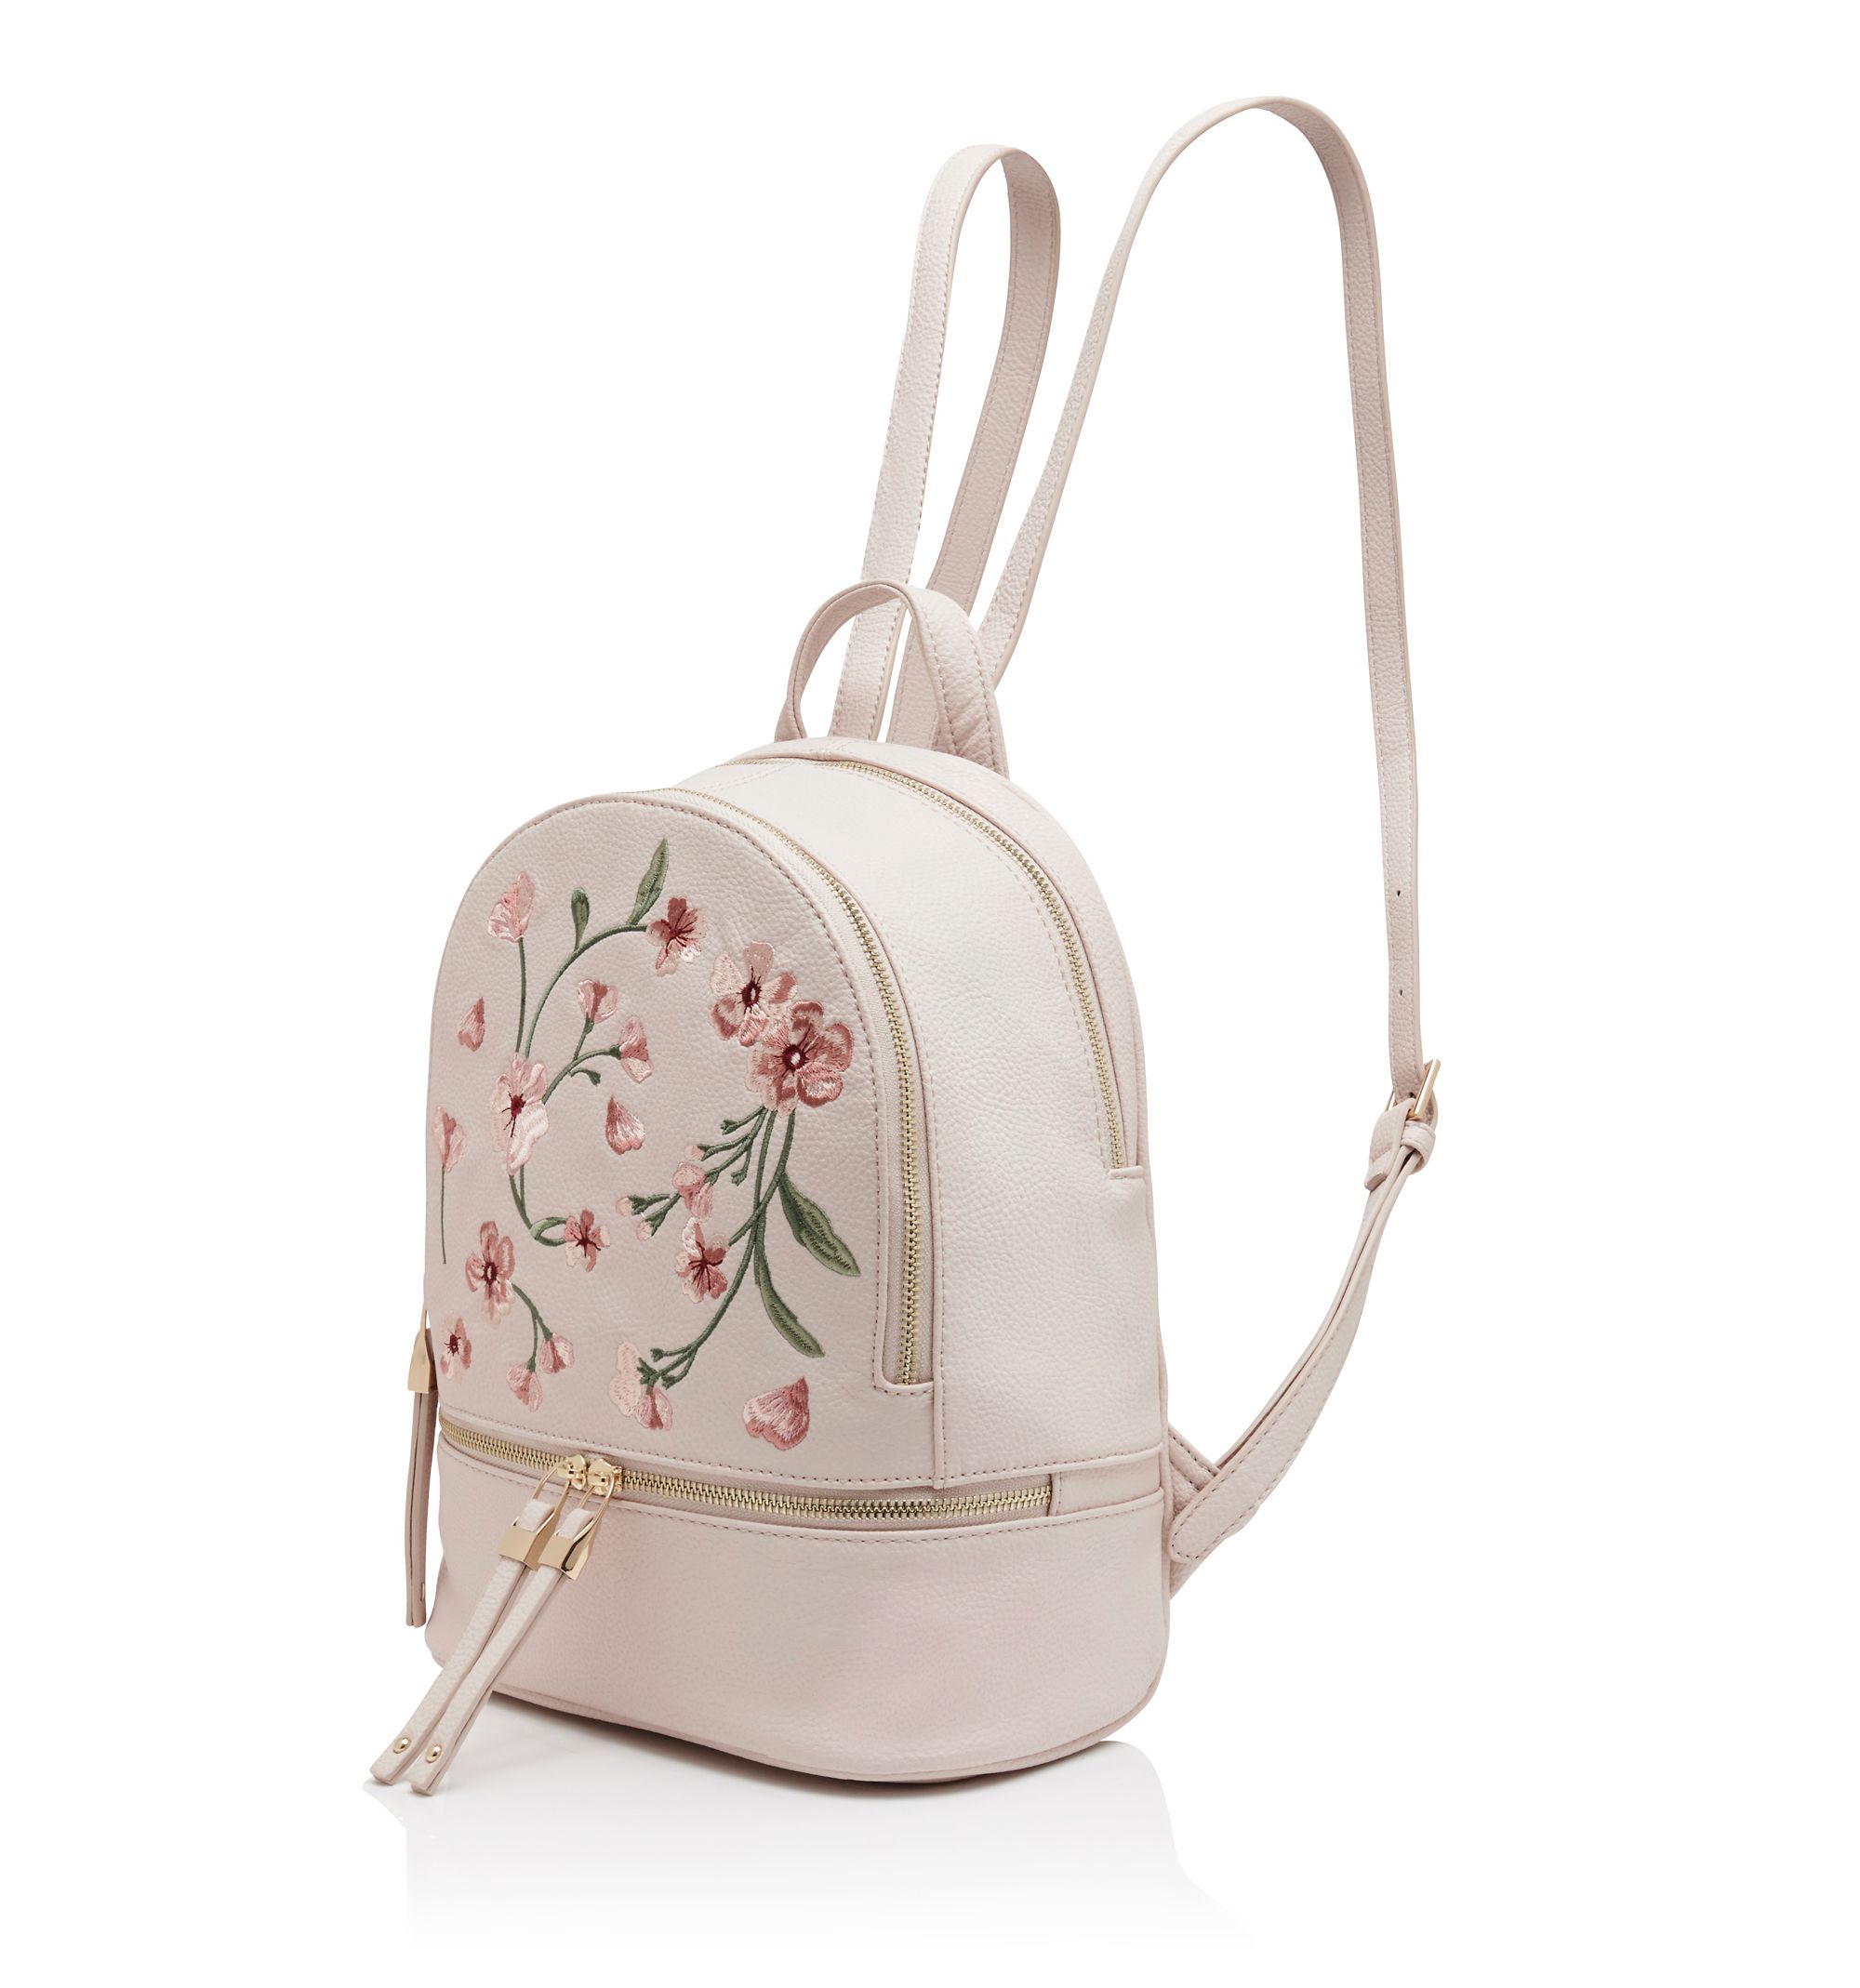 Buy Whiteley Phone Purse - Forever New